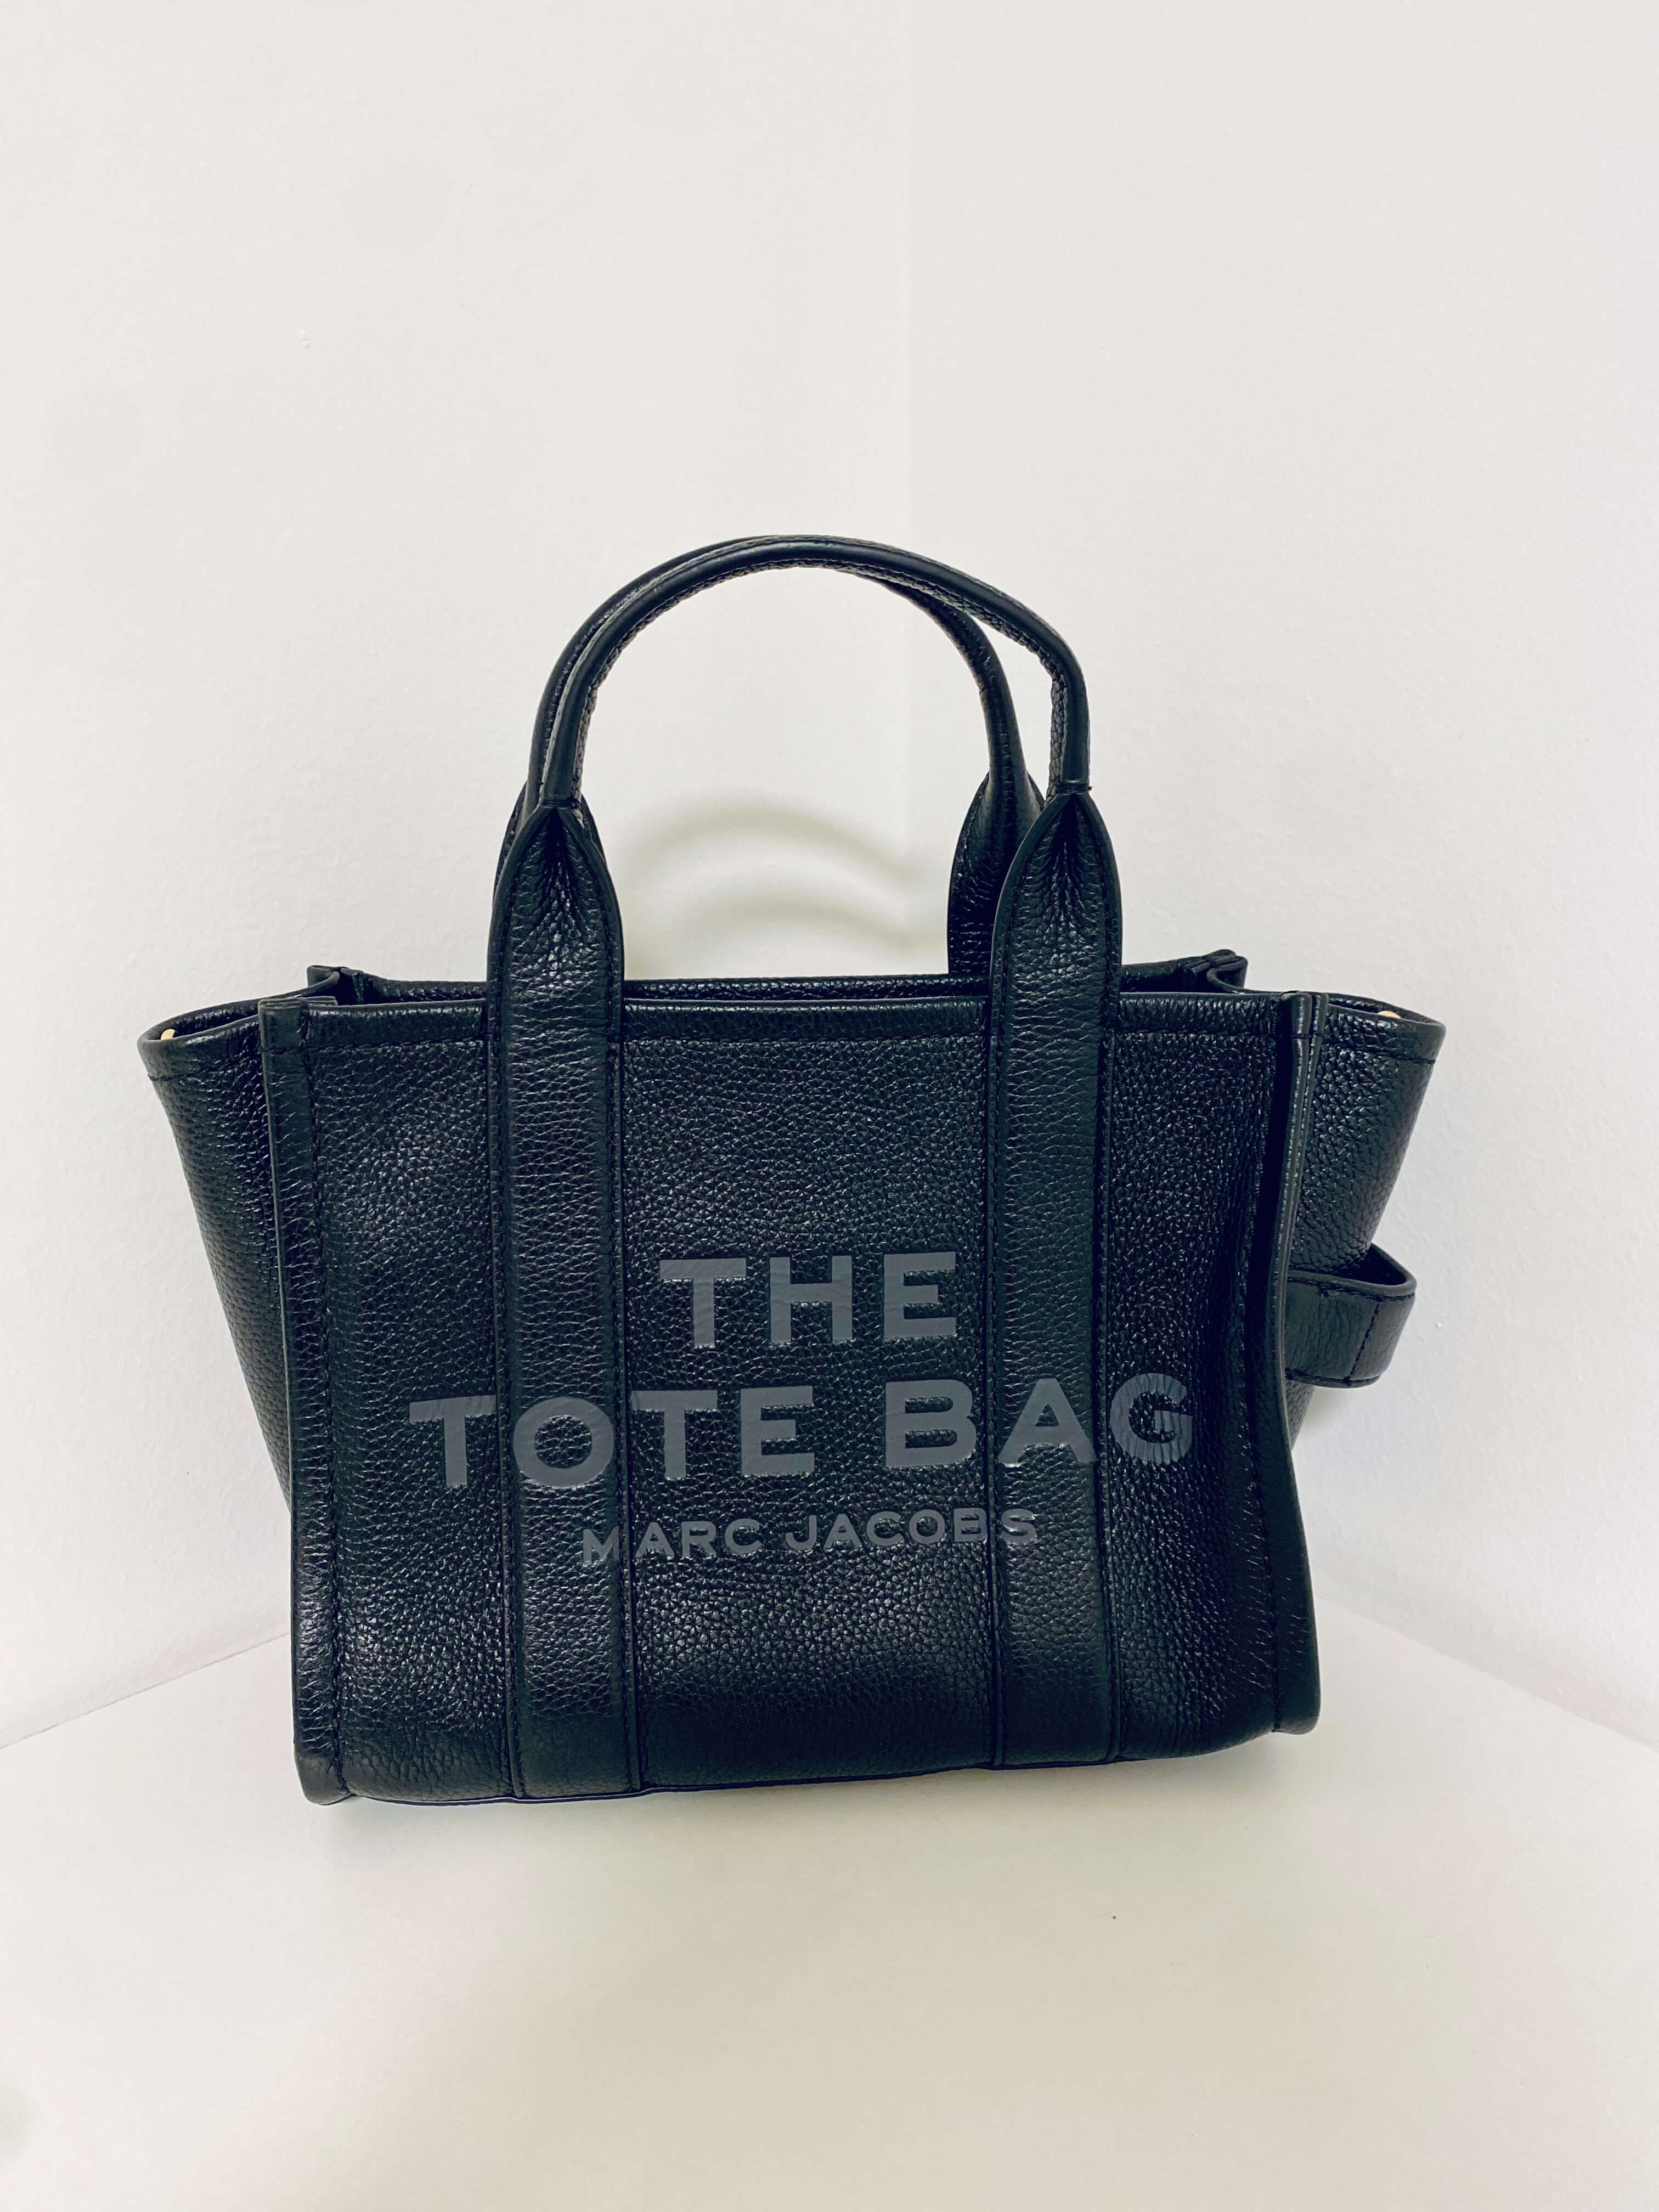 THE ULTIMATE MARC JACOBS TOTE BAG REVIEW: CANVAS VS. LEATHER - Word Nerd